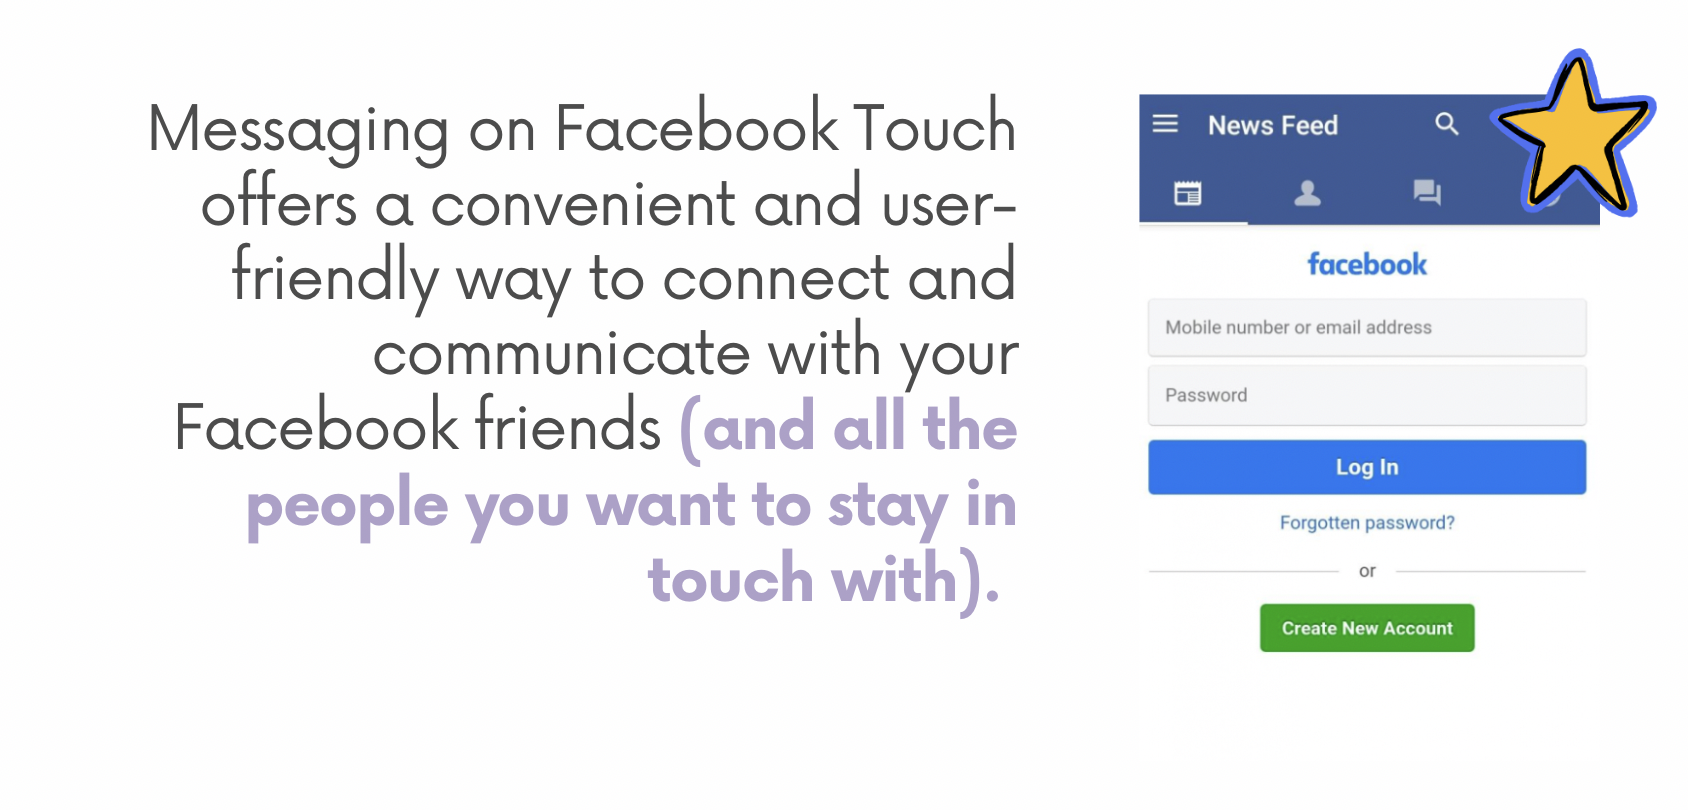 Messaging on Facebook Touch